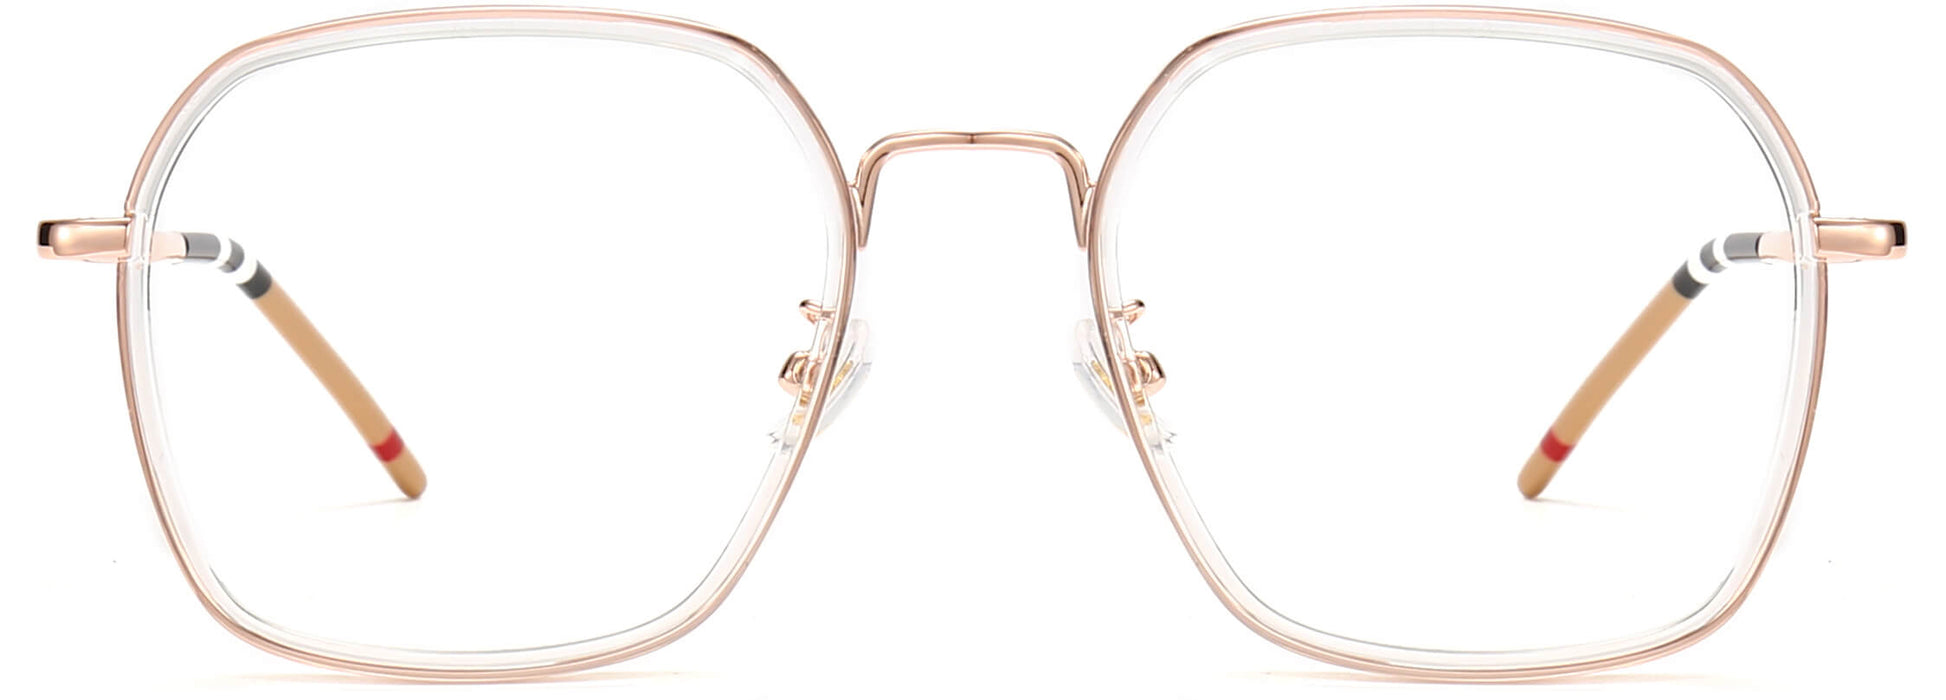 Penny Square Pink Eyeglasses from ANRRI, front view